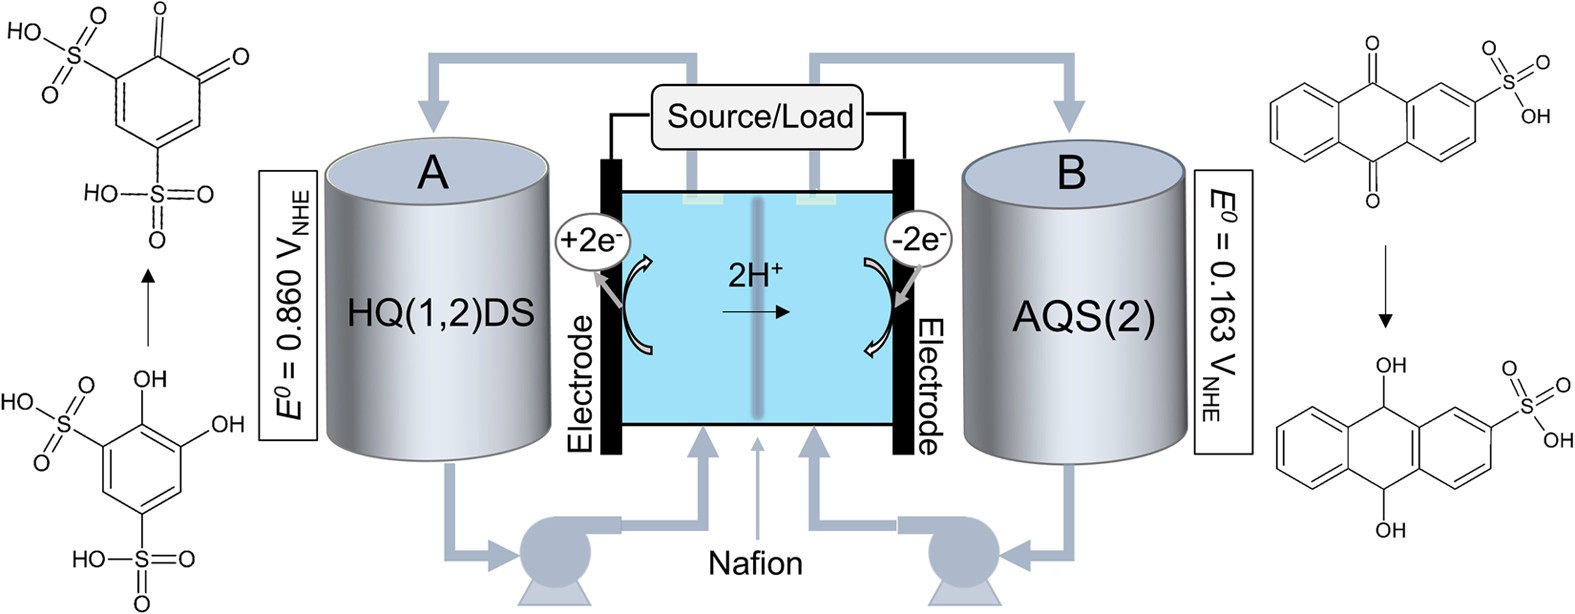 Organic Redox in Aqueous Flow Batteries: Potentials, Chemical Stability and Solubility | Scientific